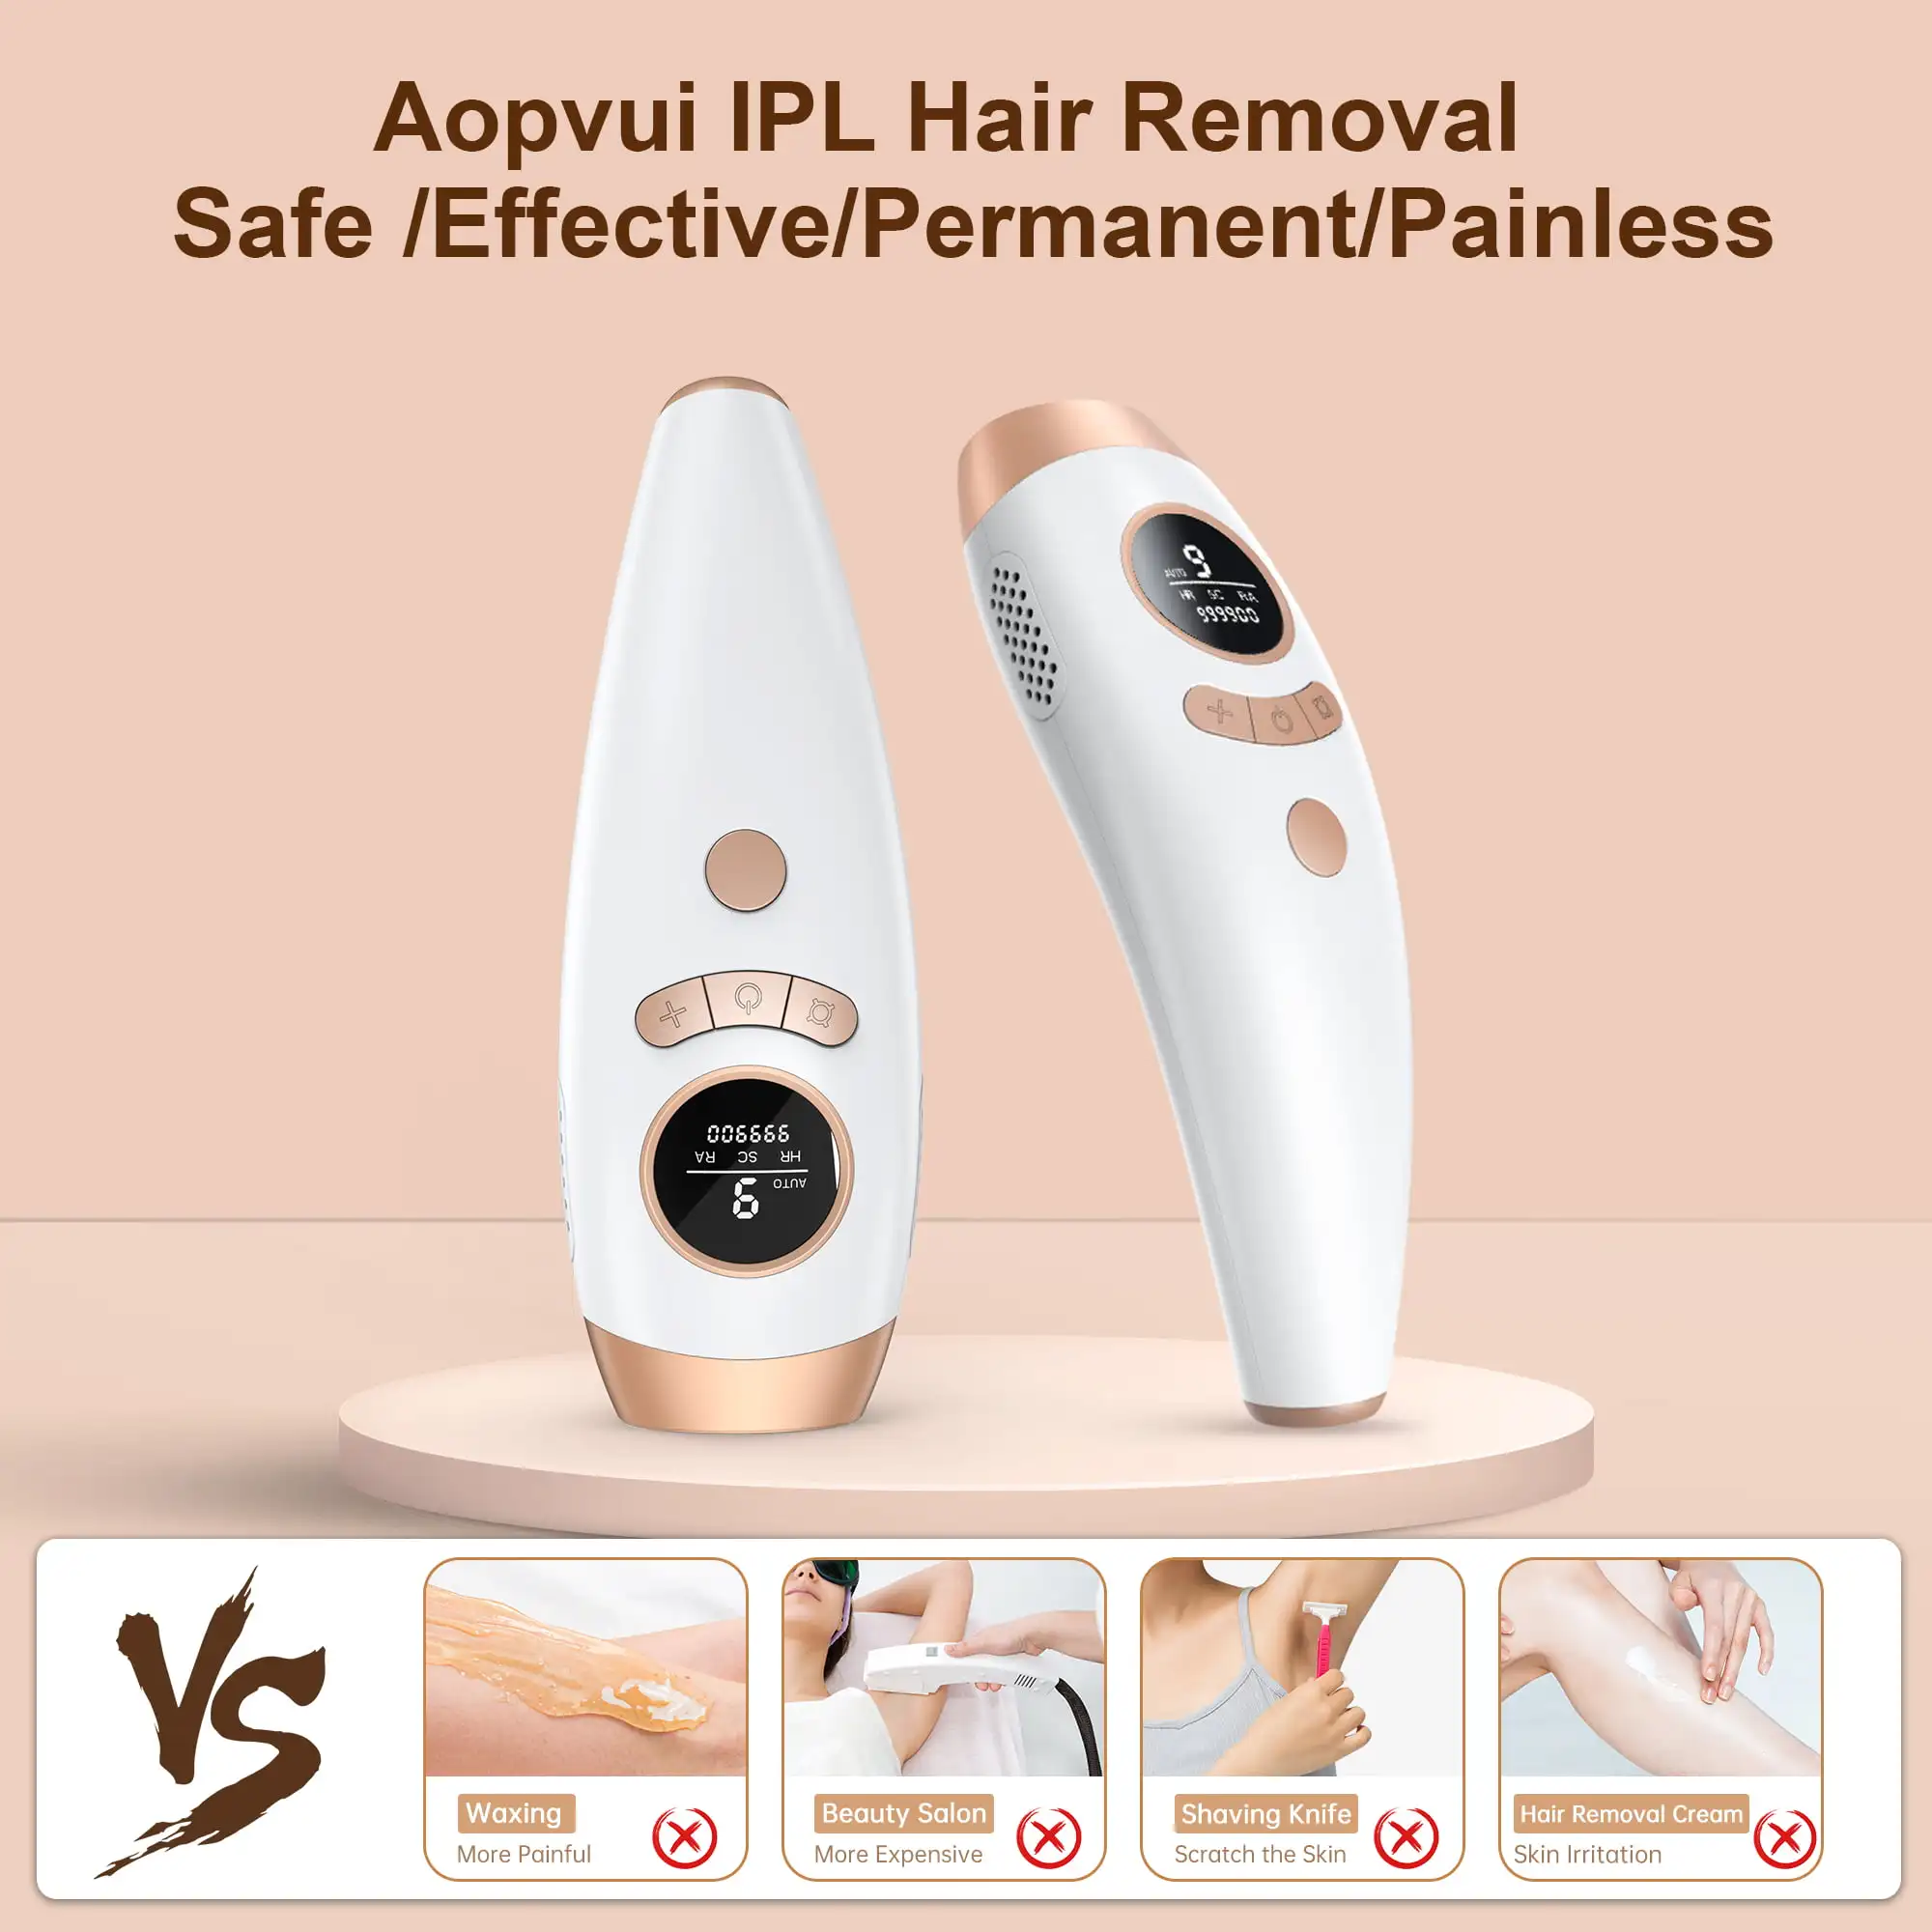 IPL Hair Removal Laser Permanent Hair Removal 999900 Flashes At-Home Hair Removal Device for Whole Body